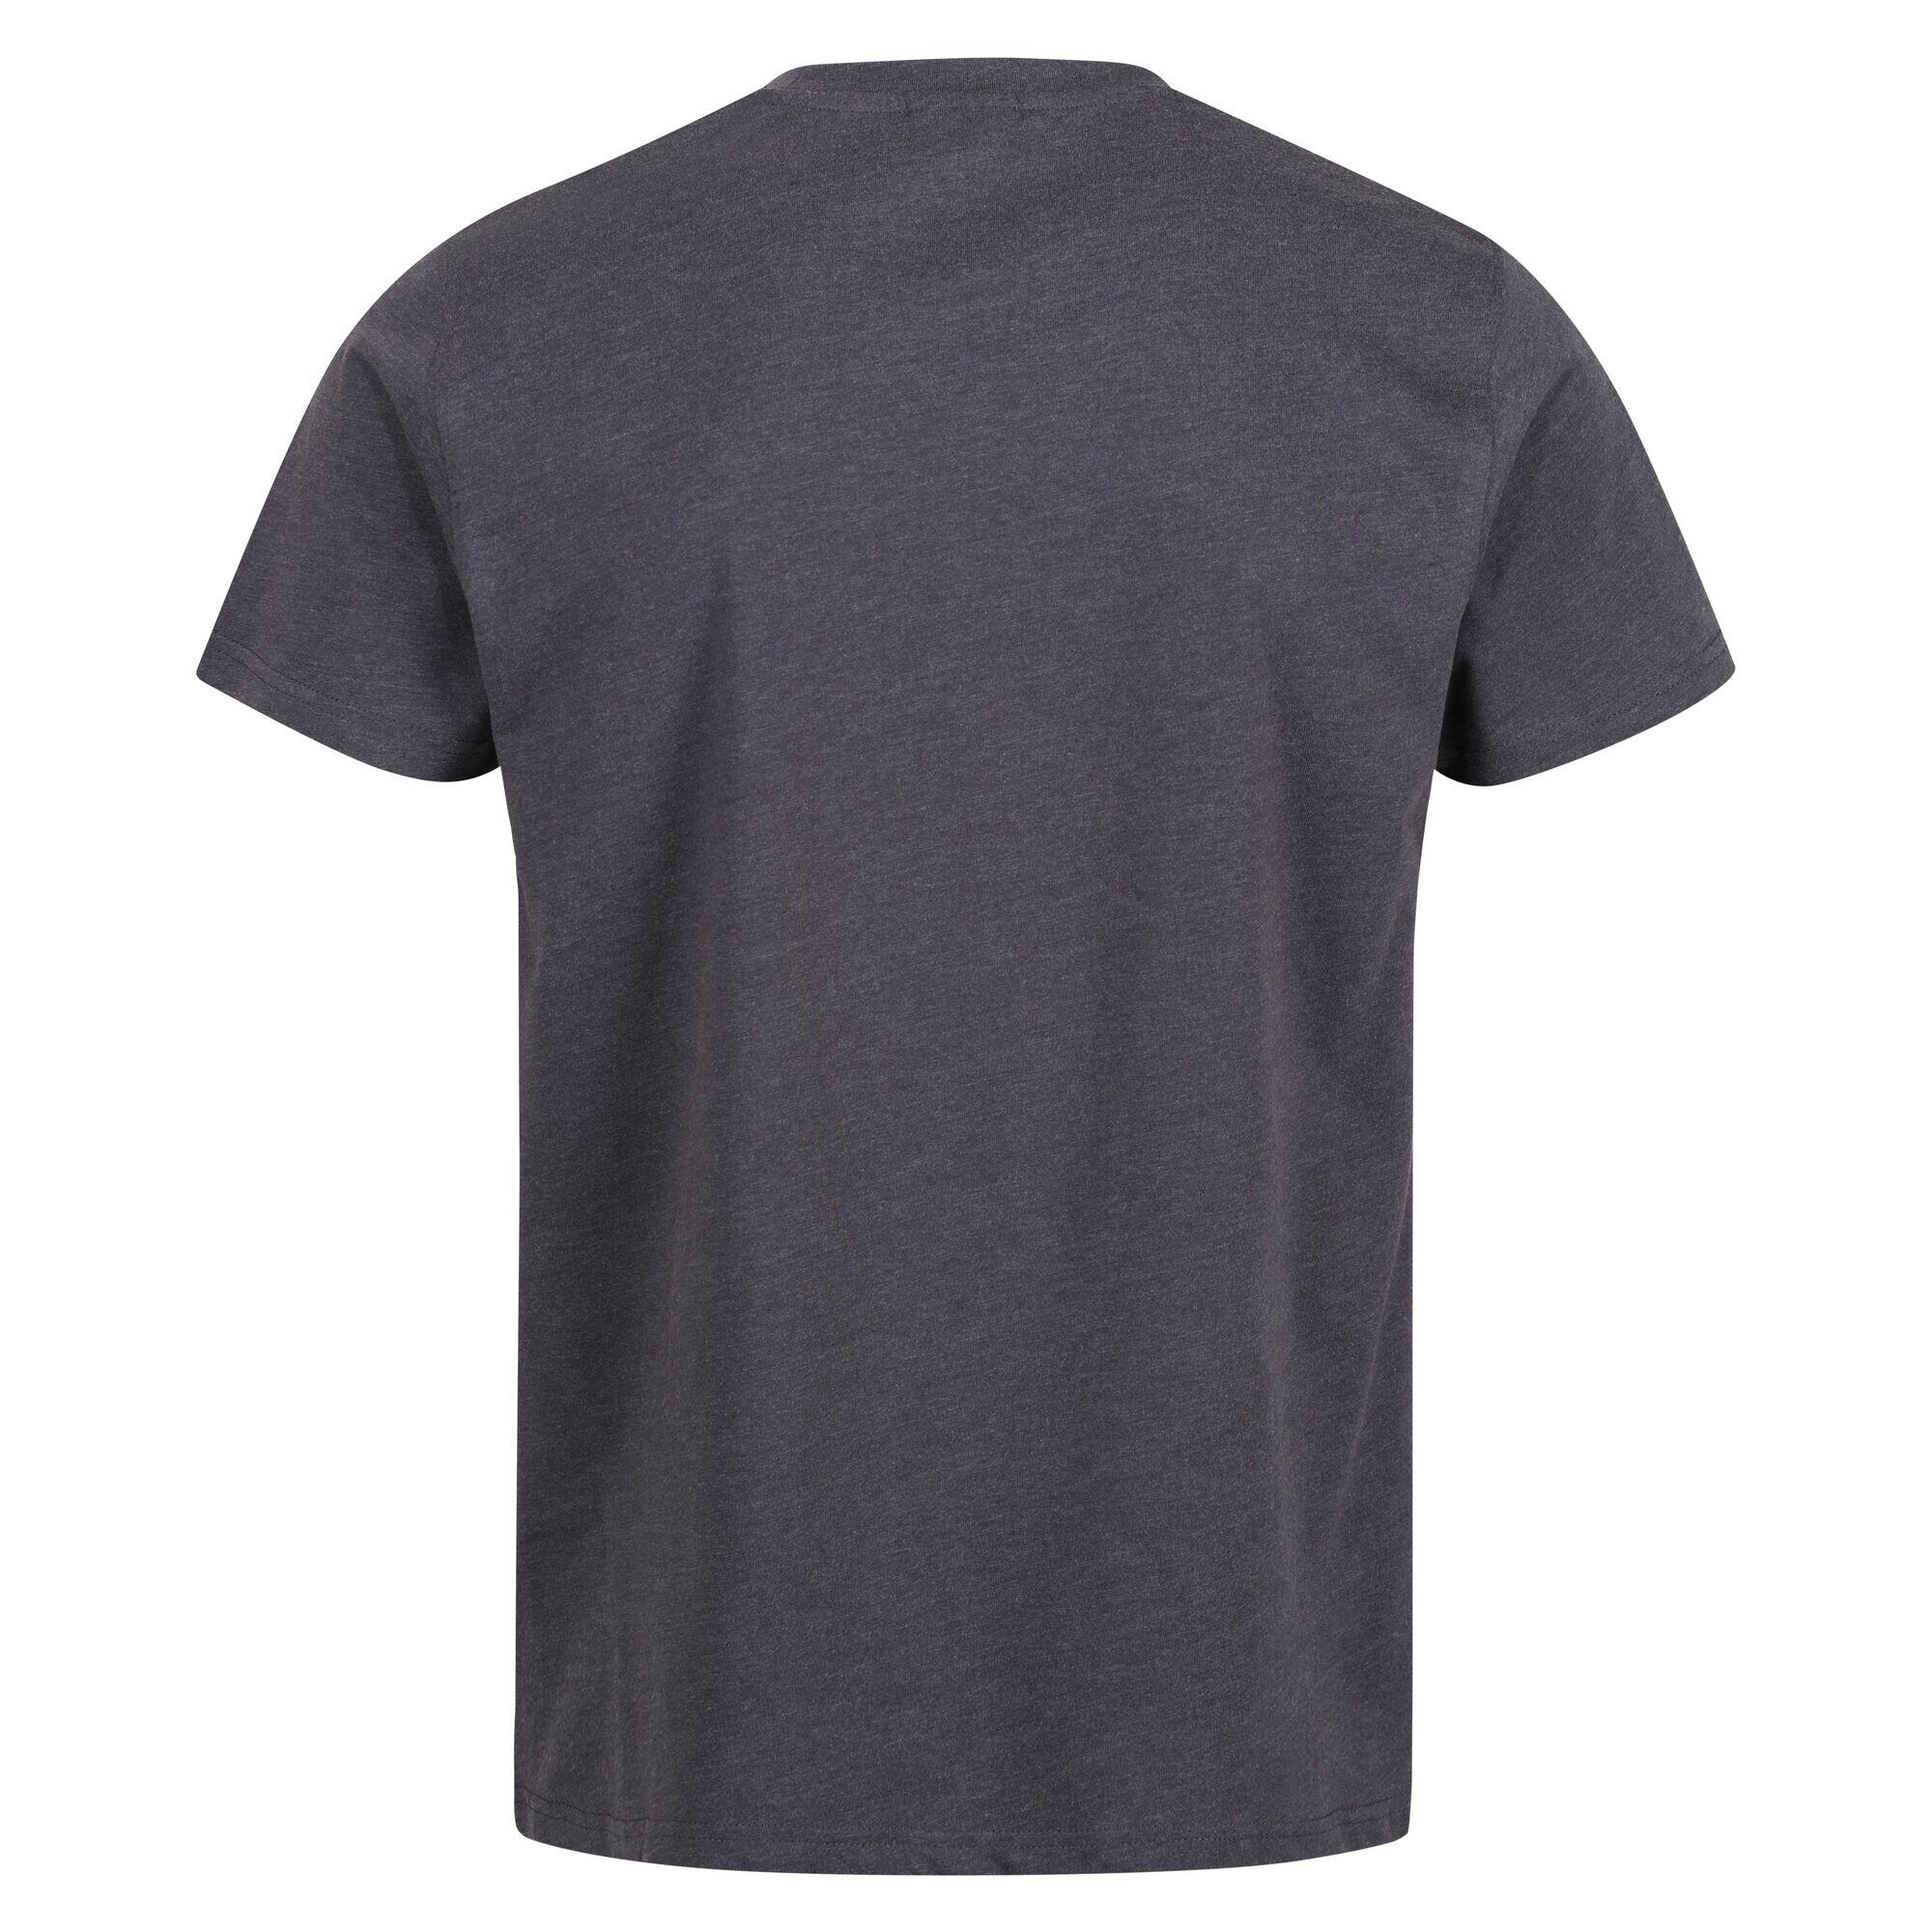 Mens Pro Cotton Soft Touch TShirt (Seal Grey) 2/5